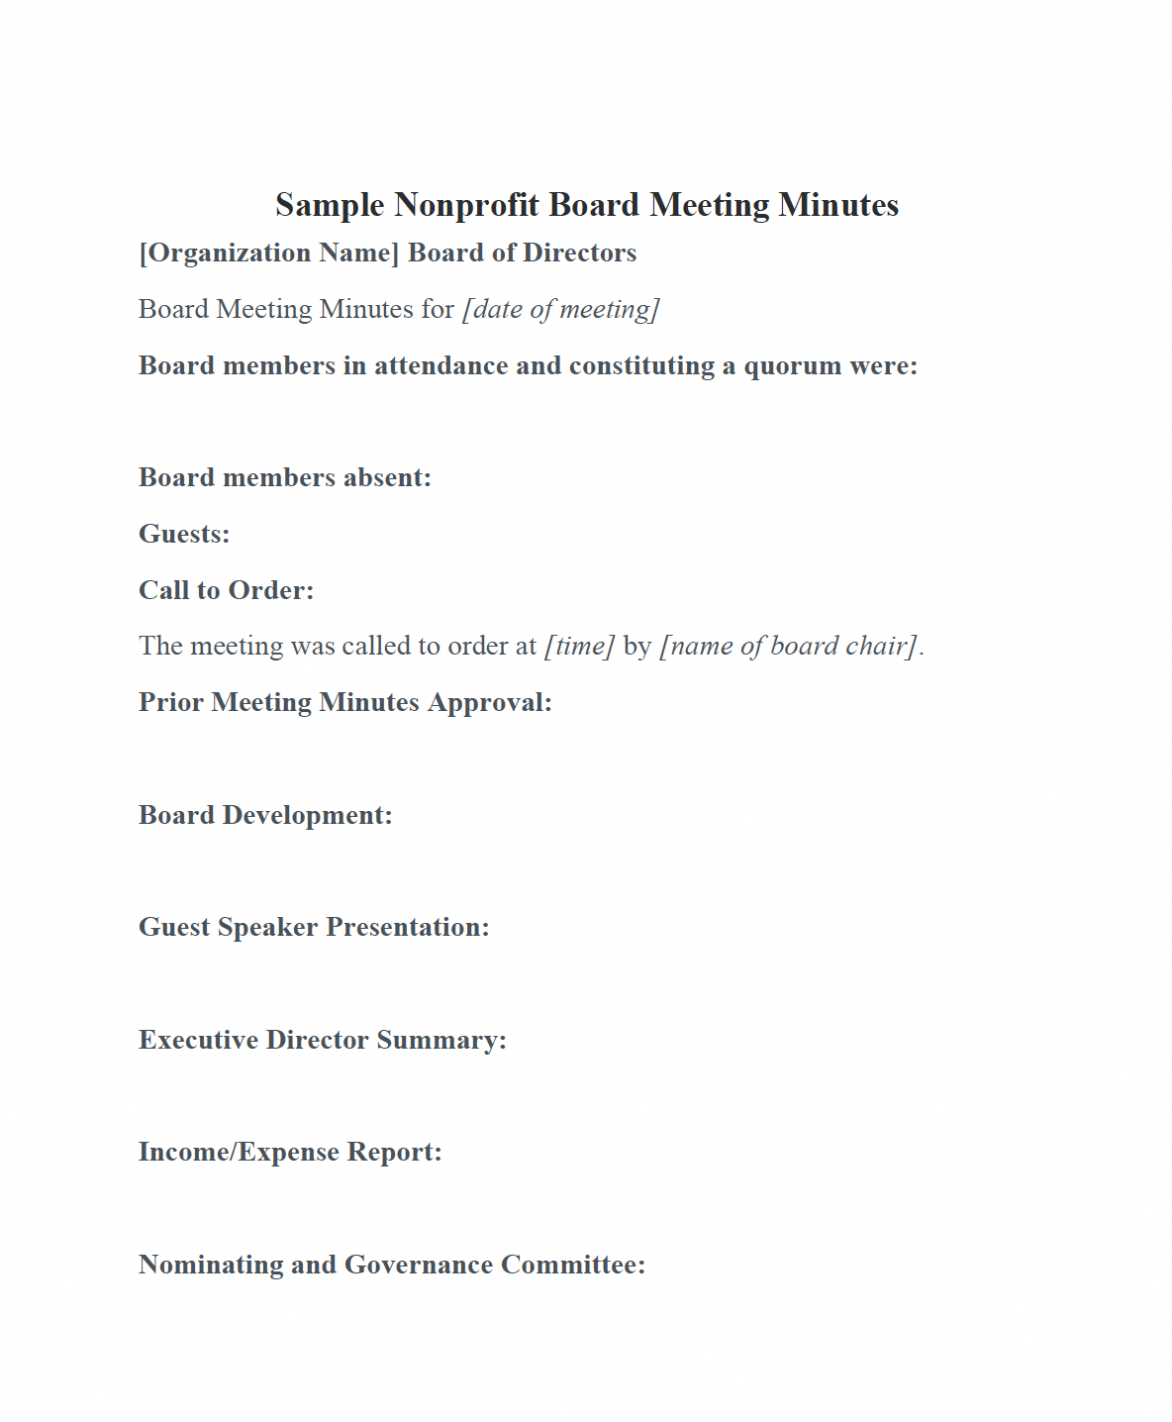 Nonprofit Board Meeting Minutes Template | Diligent Insights pertaining to Non Profit Board Meeting Minutes Template